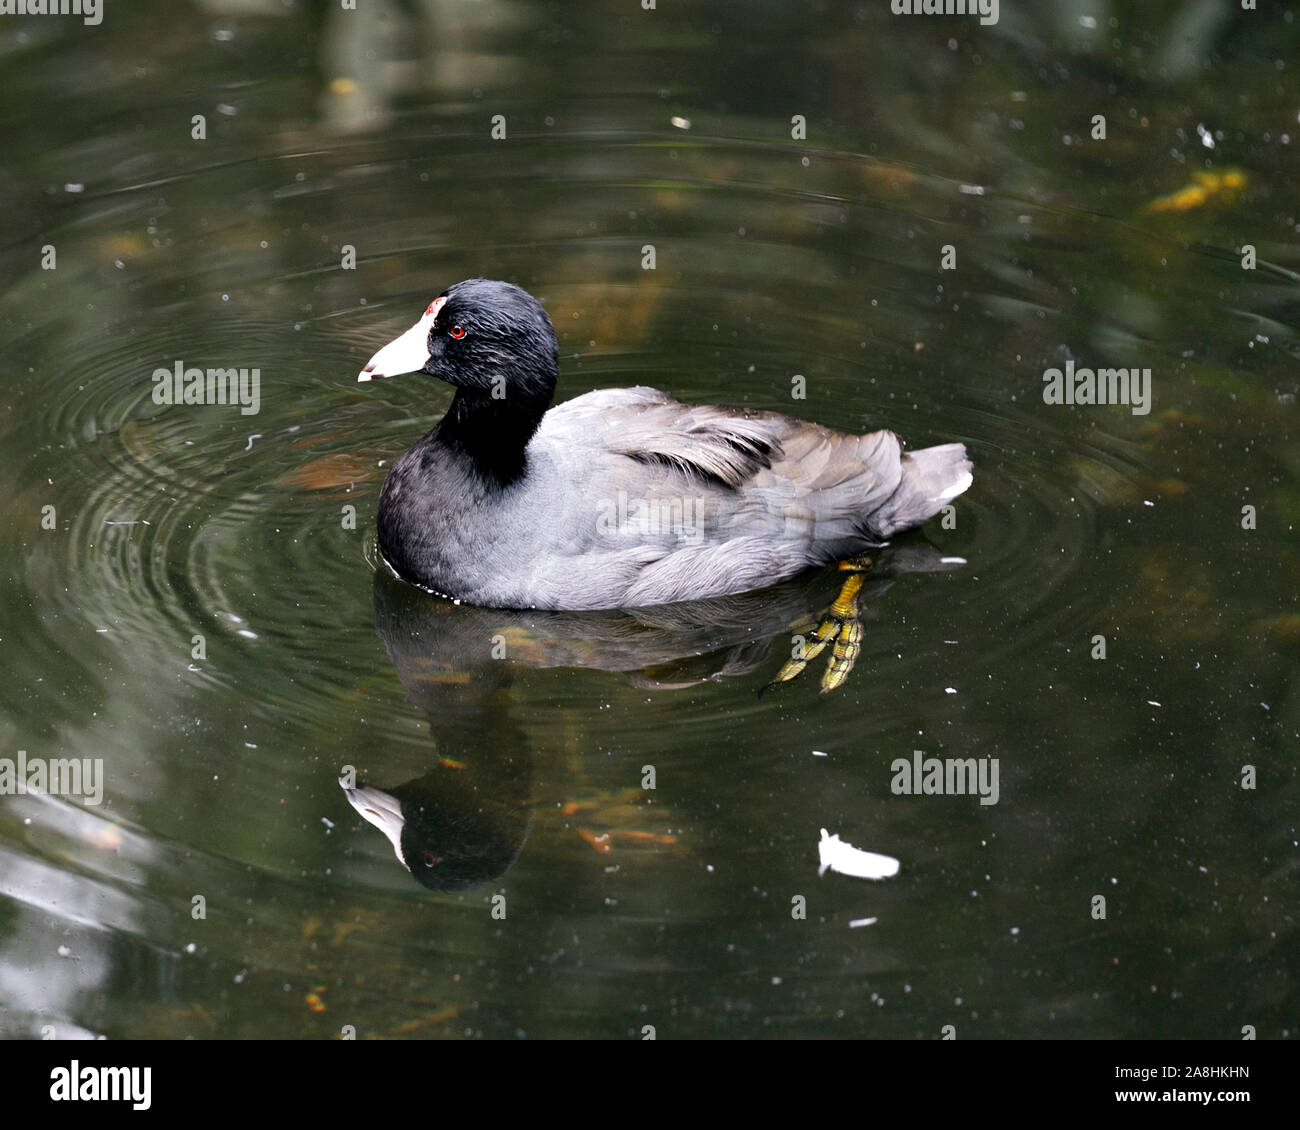 Black Scoter or American Scoter bird close up in the water, showing its head, eye, beak, feet and black plumage and enjoying its environment and surro Stock Photo